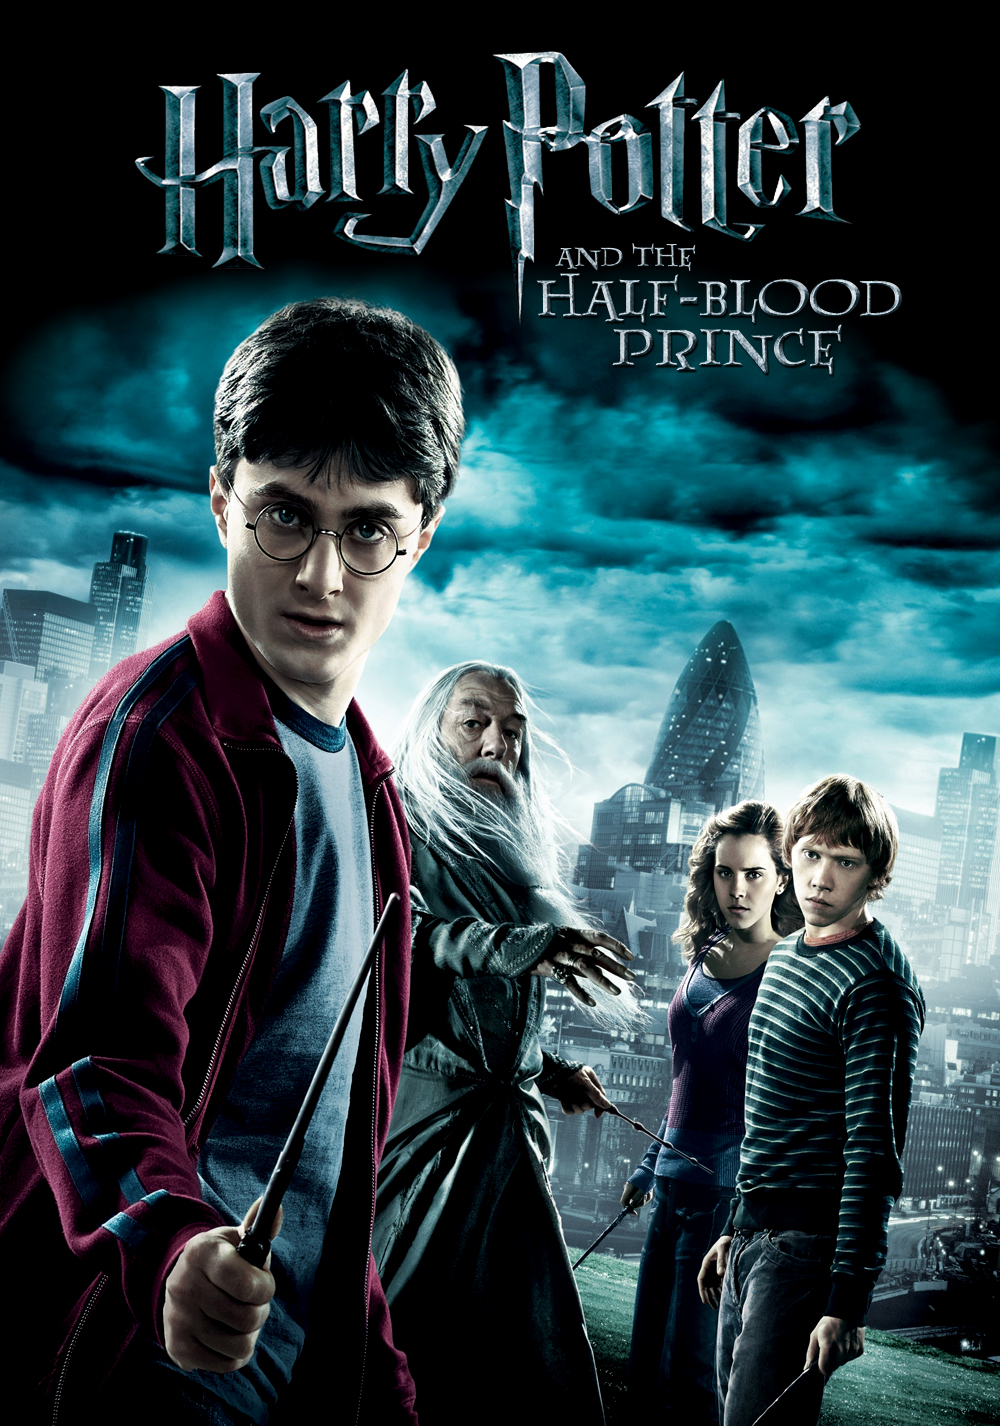 Harry Potter And The Half-blood Prince #22